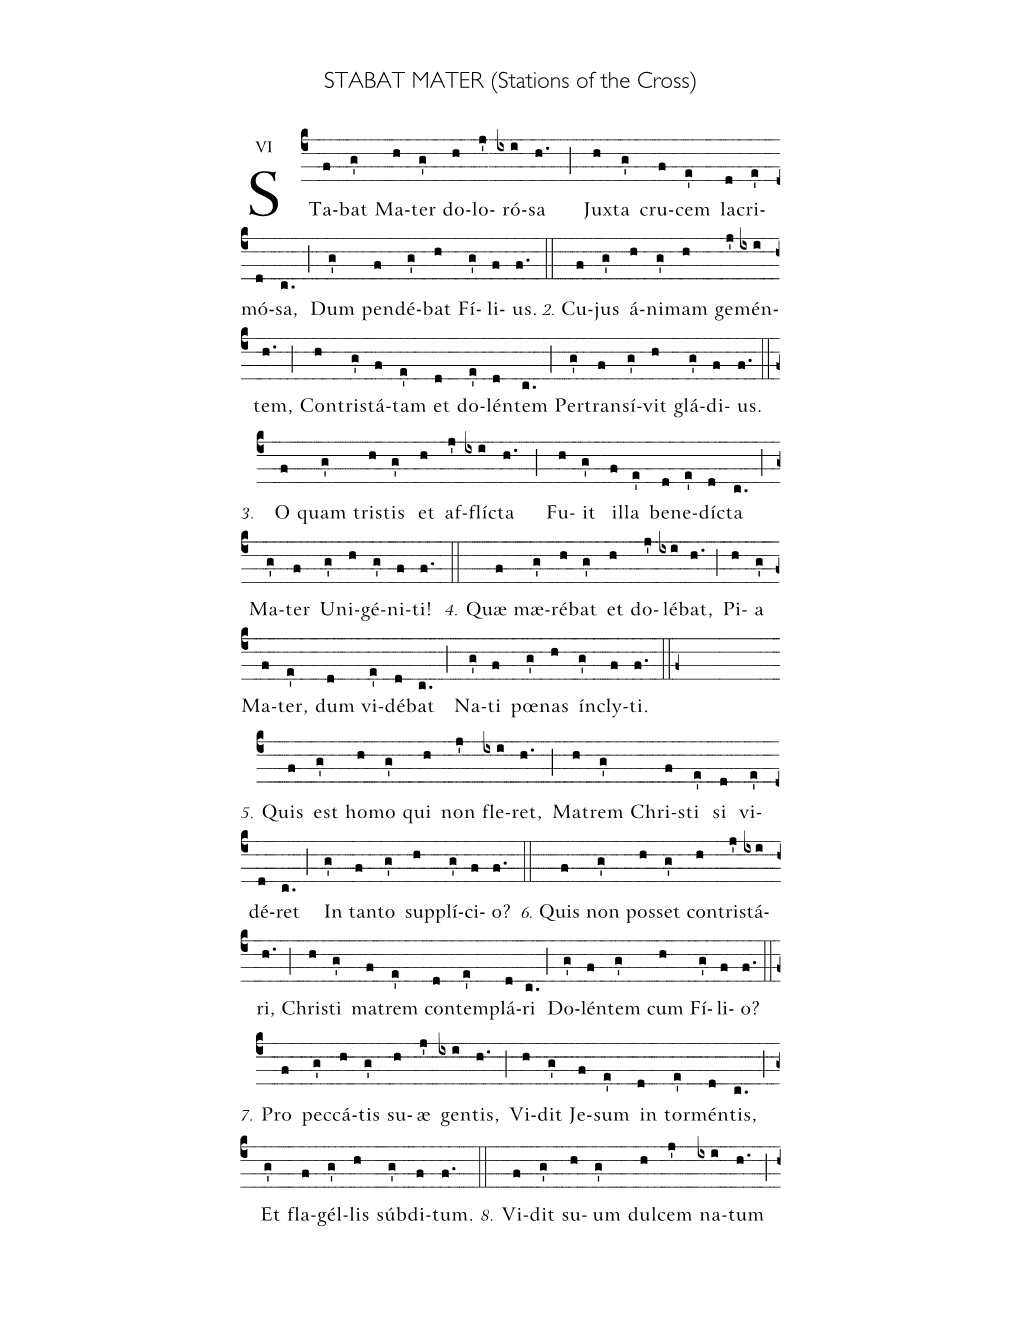 STABAT MATER, Simple Tone for the Stations of the Cross